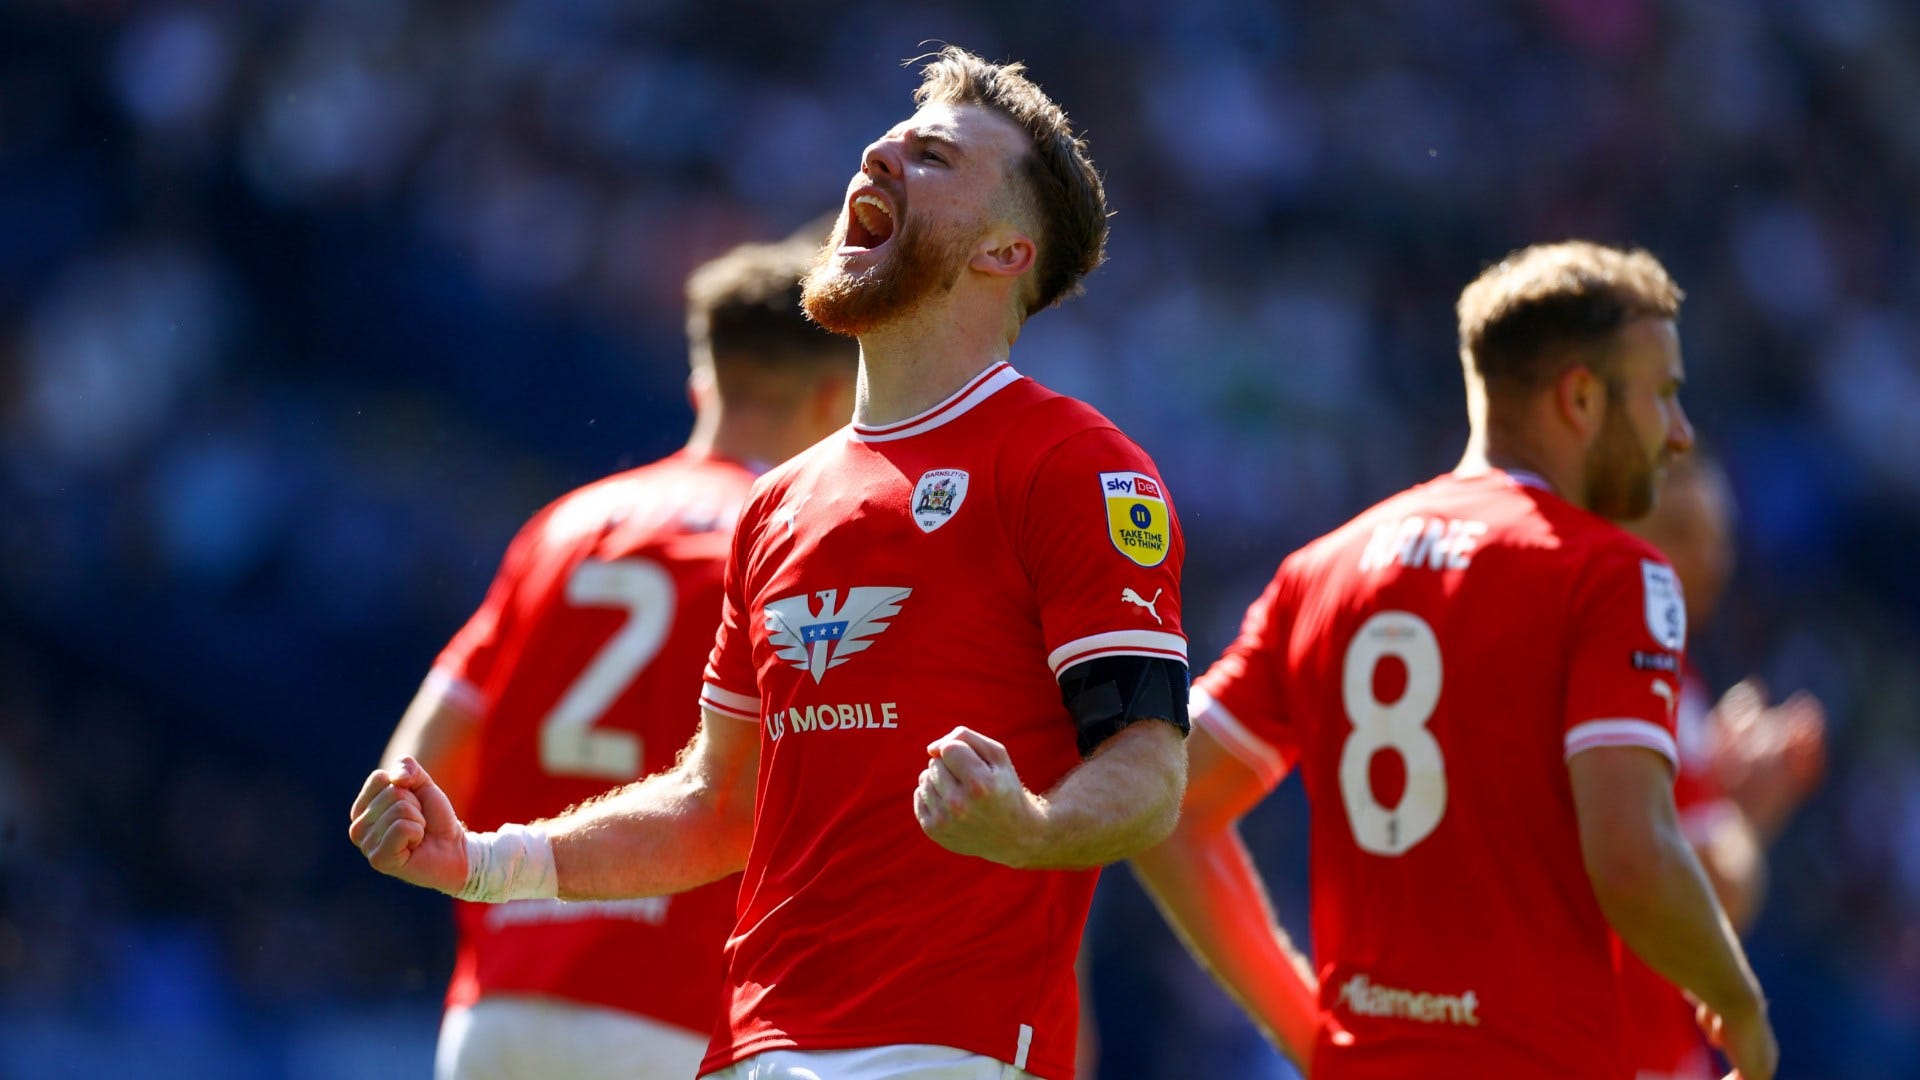 Barnsley vs Bolton Live stream, TV channel, kick-off time and where to watch League One play-off semi-final Goal UK